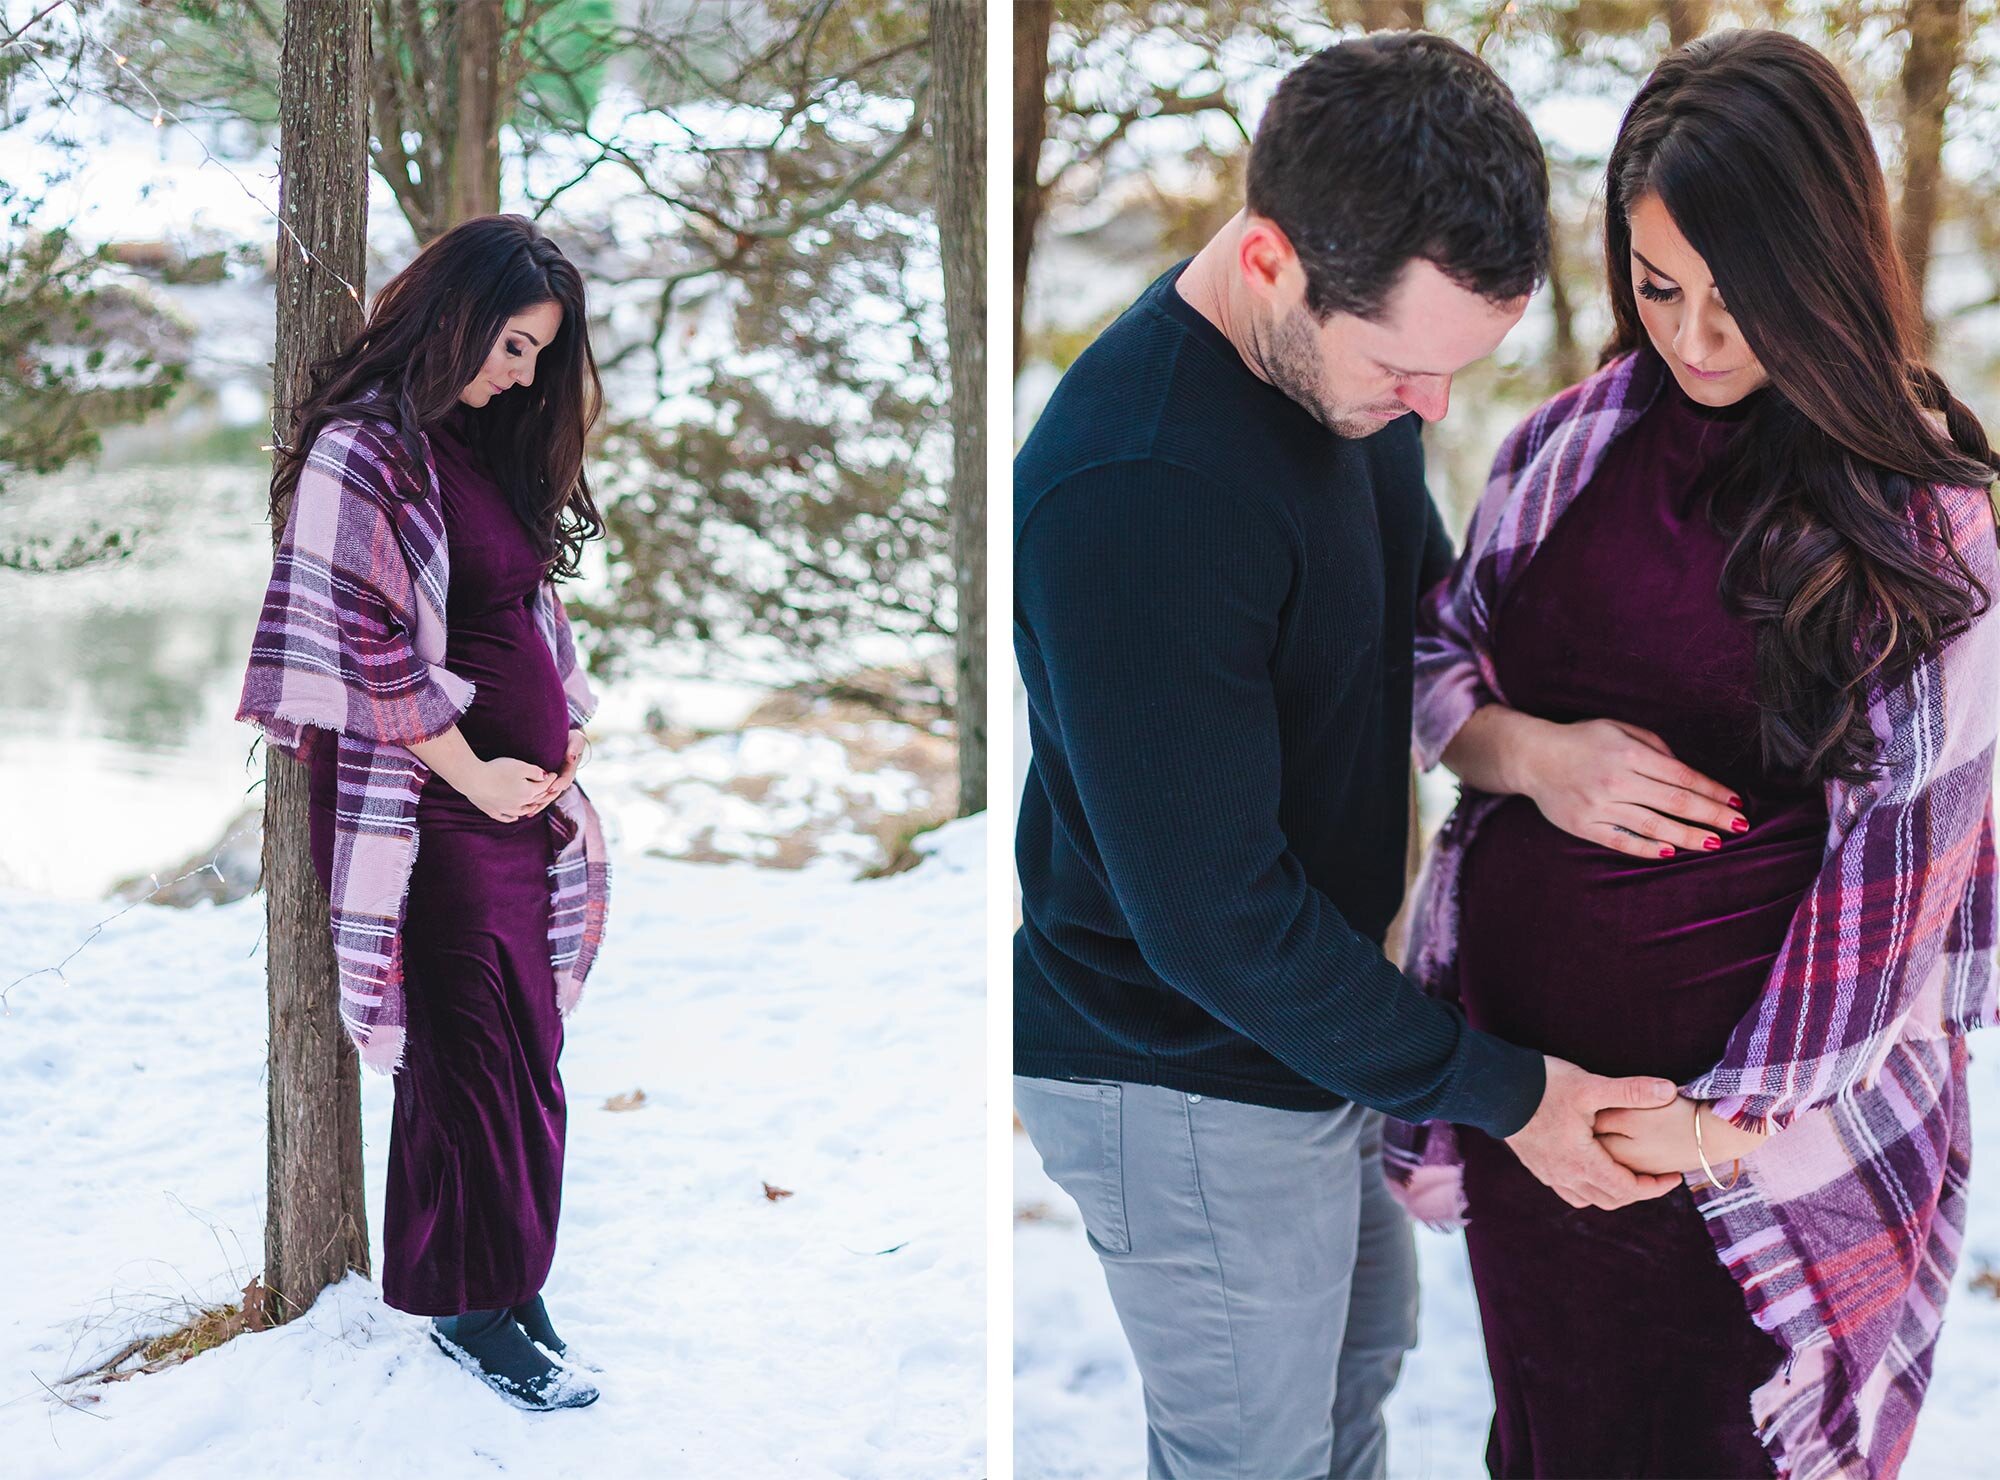 Andover Maternity Photographer | Stephen Grant Photography